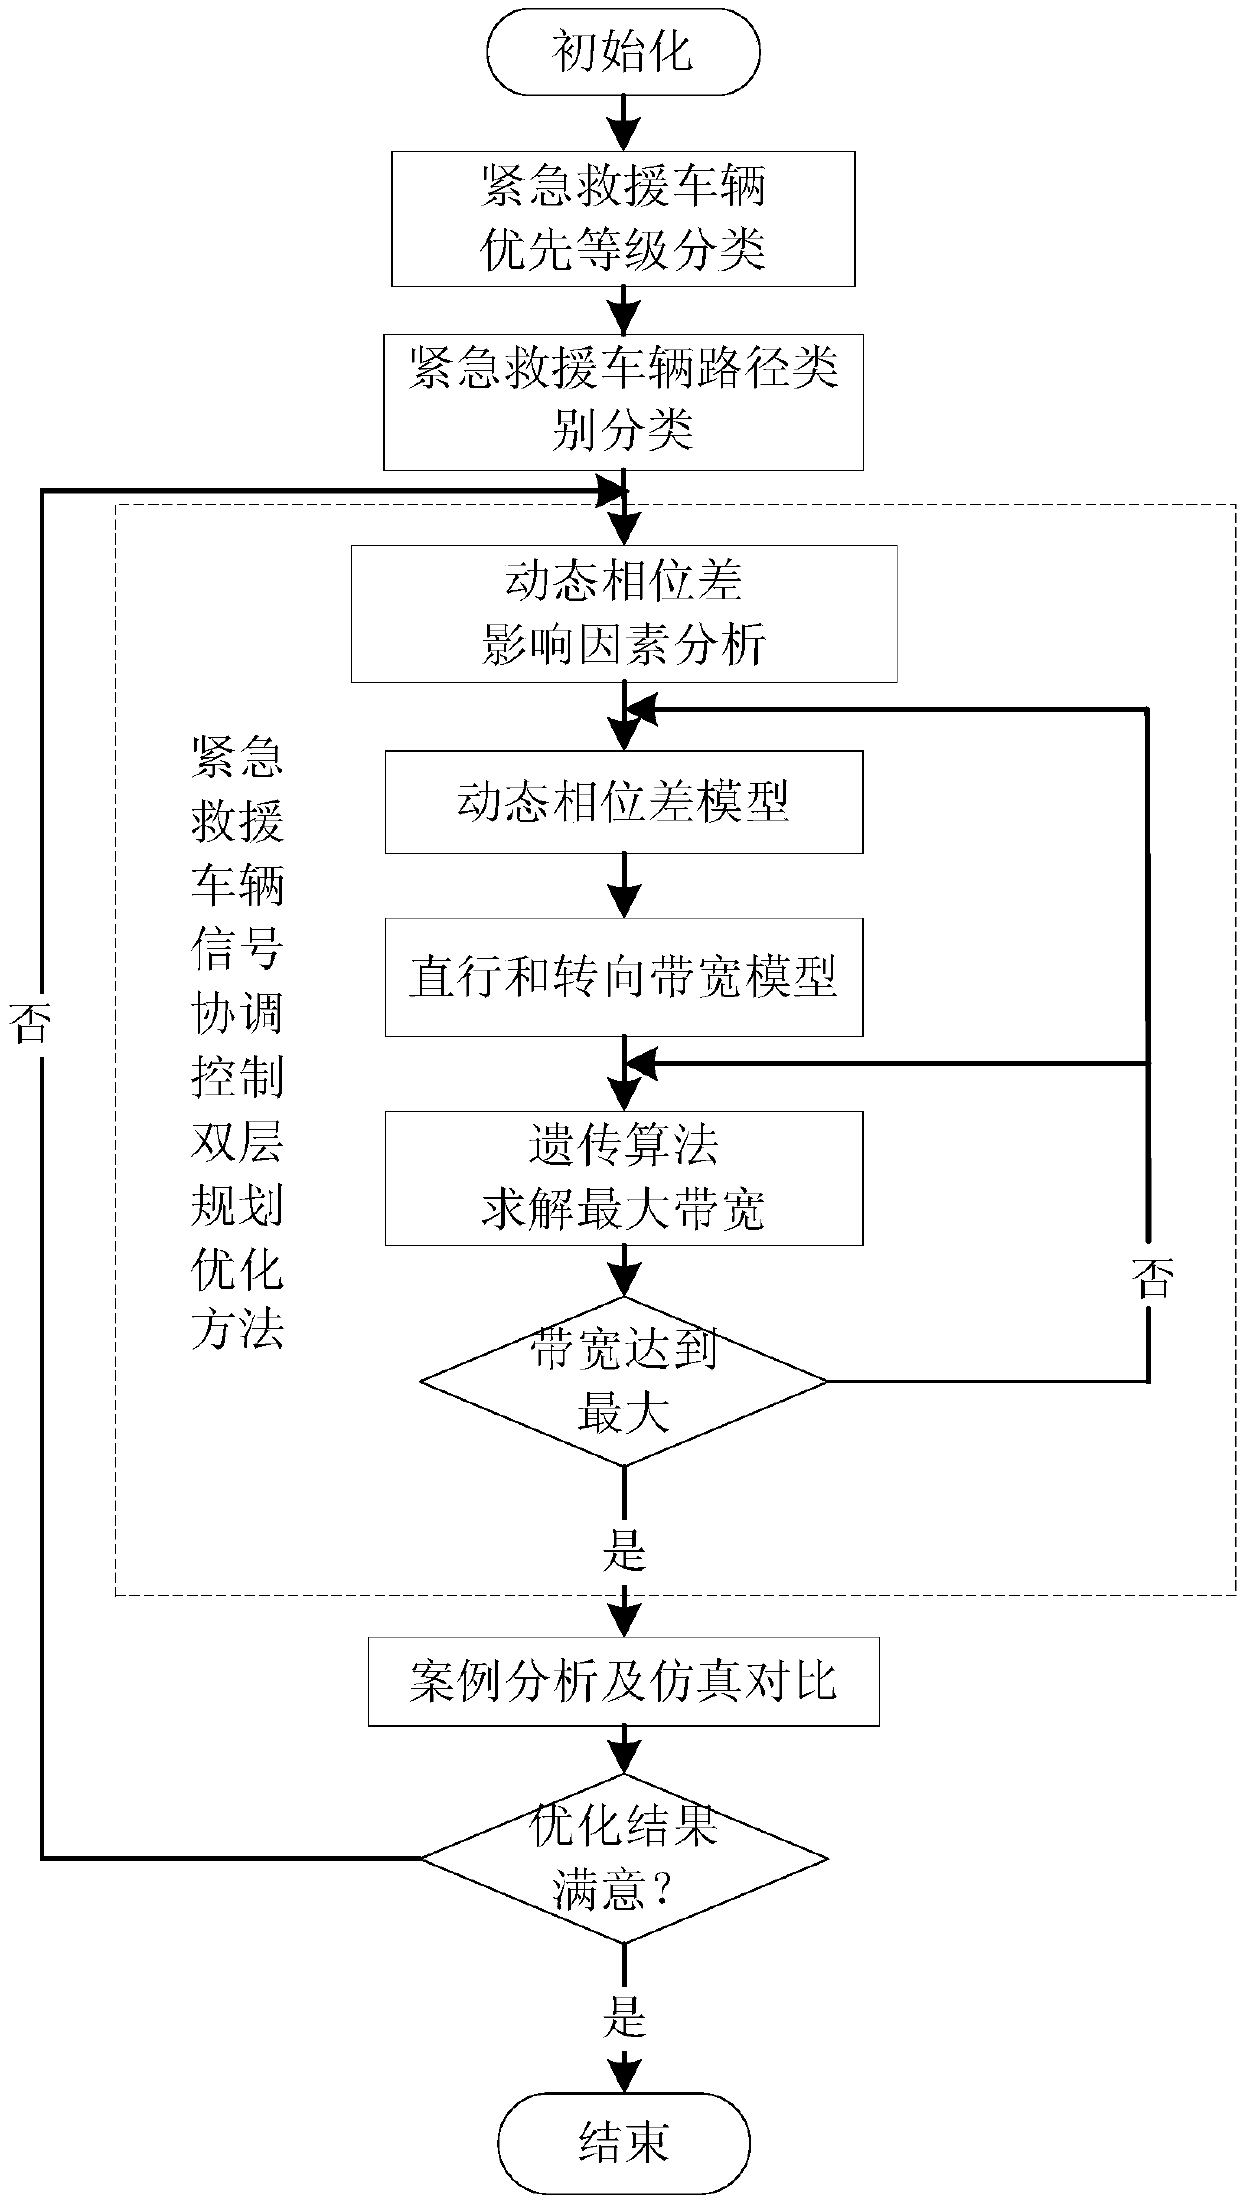 Traffic signal coordination control optimization method for emergency rescue vehicle driving path